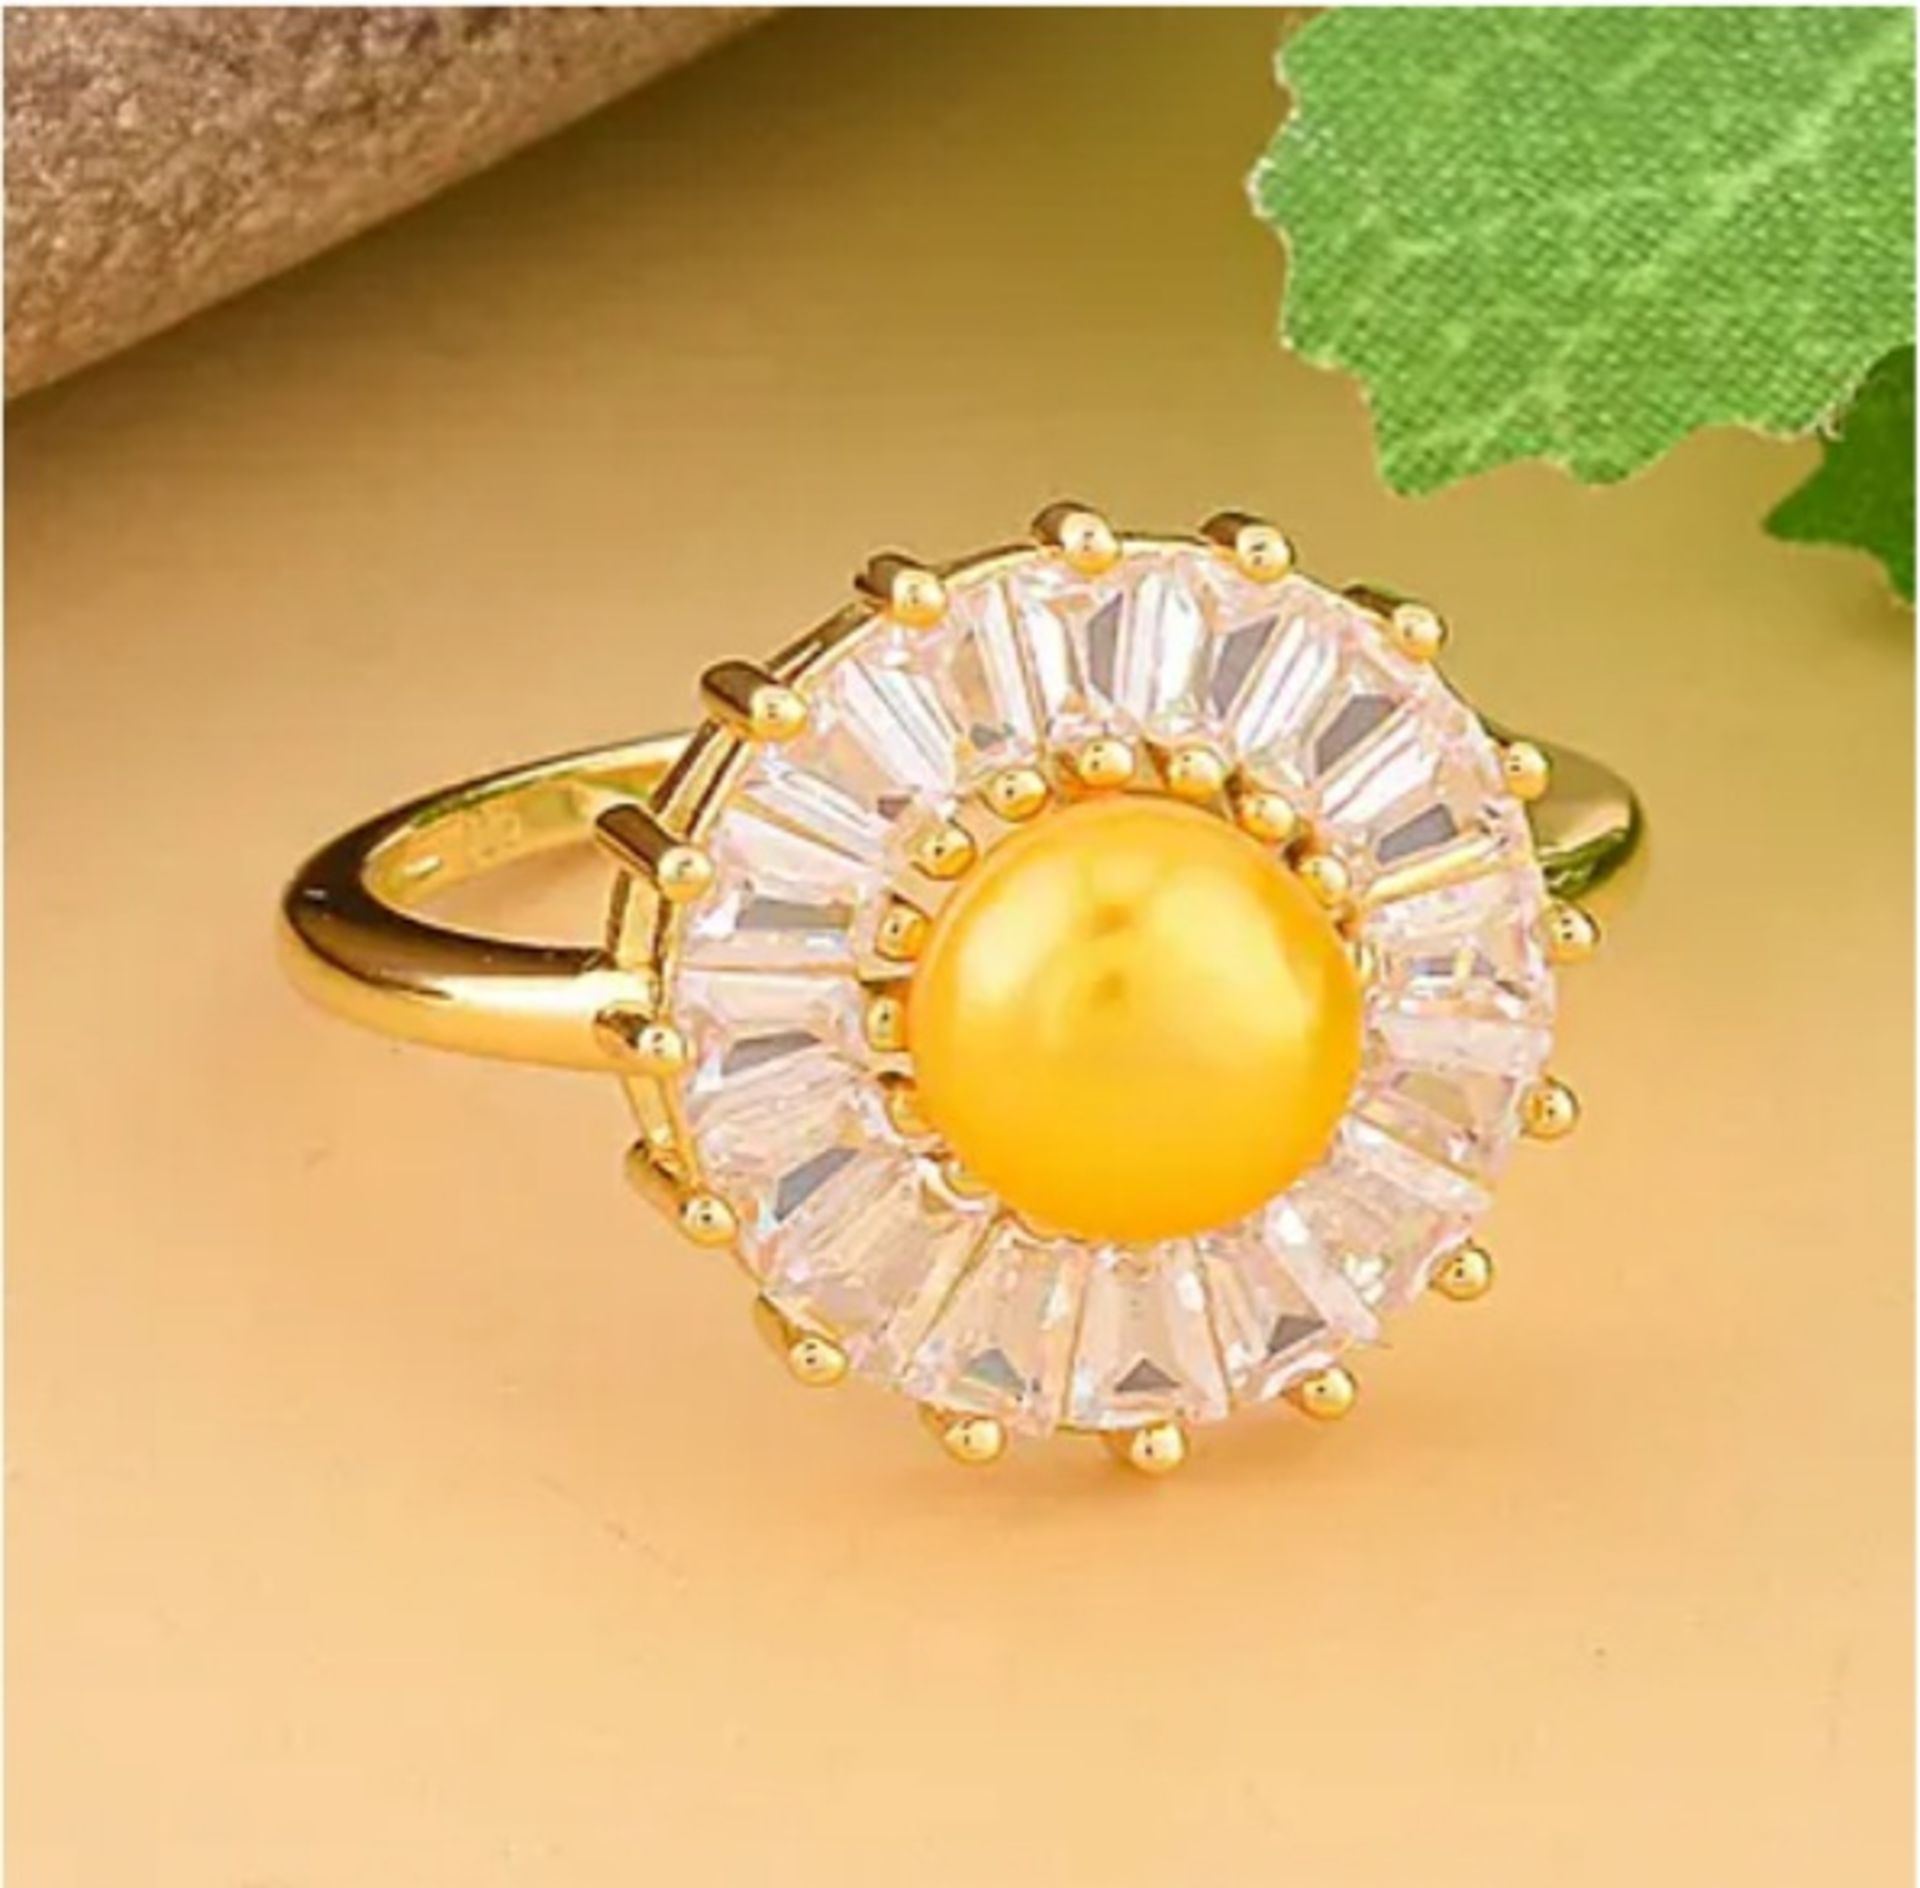 NEW! Golden Fresh Water Pearl and Simulated Diamond Floral Ring